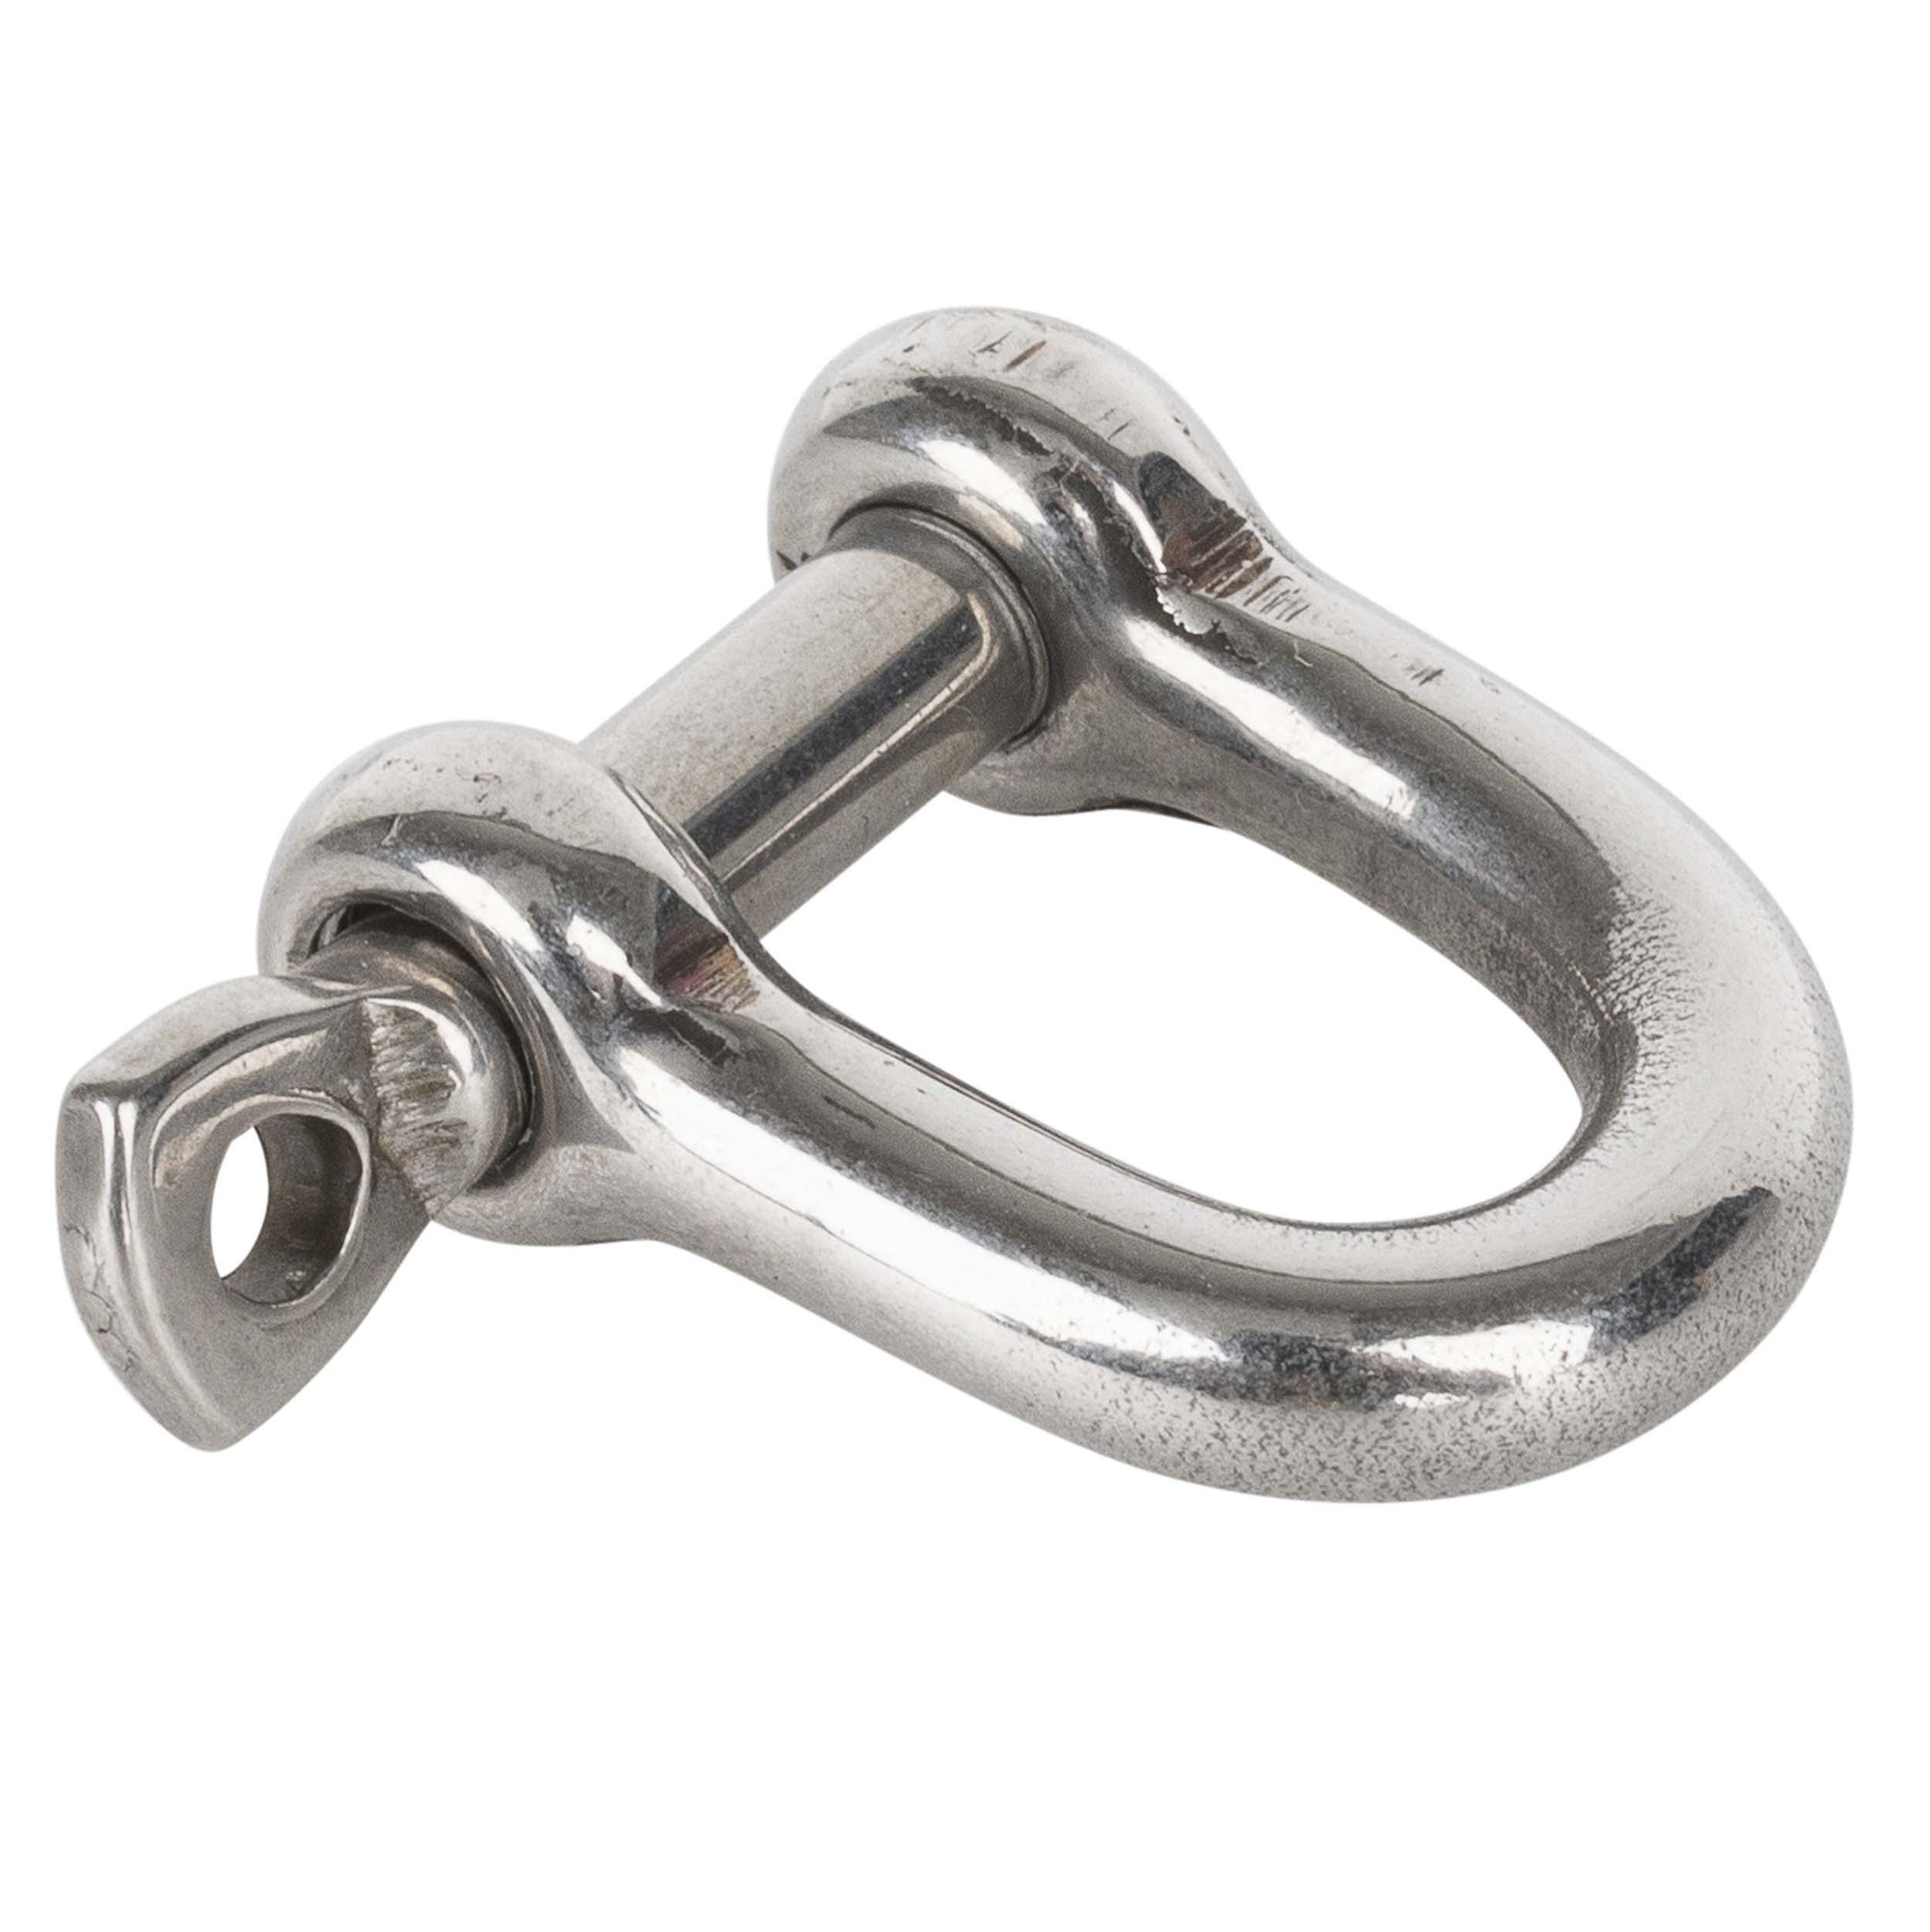 5mm stainless steel straight captive pin sailing shackle 1/4